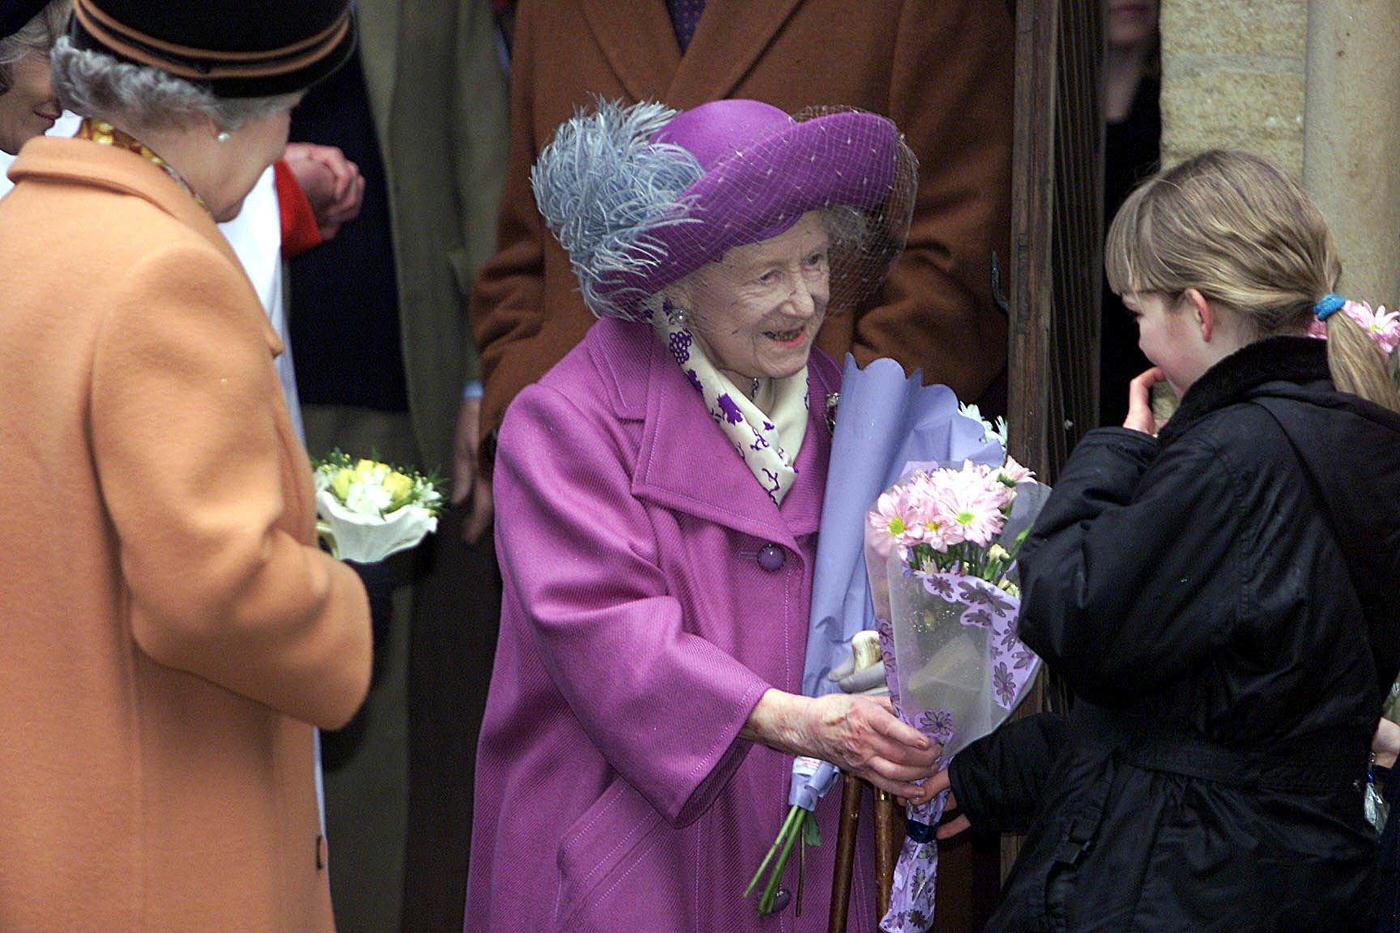 The Queen Mother accepts flowers from a young girl as she attends a church service commemorating the death 100 years ago of Queen Victoria, 2001.